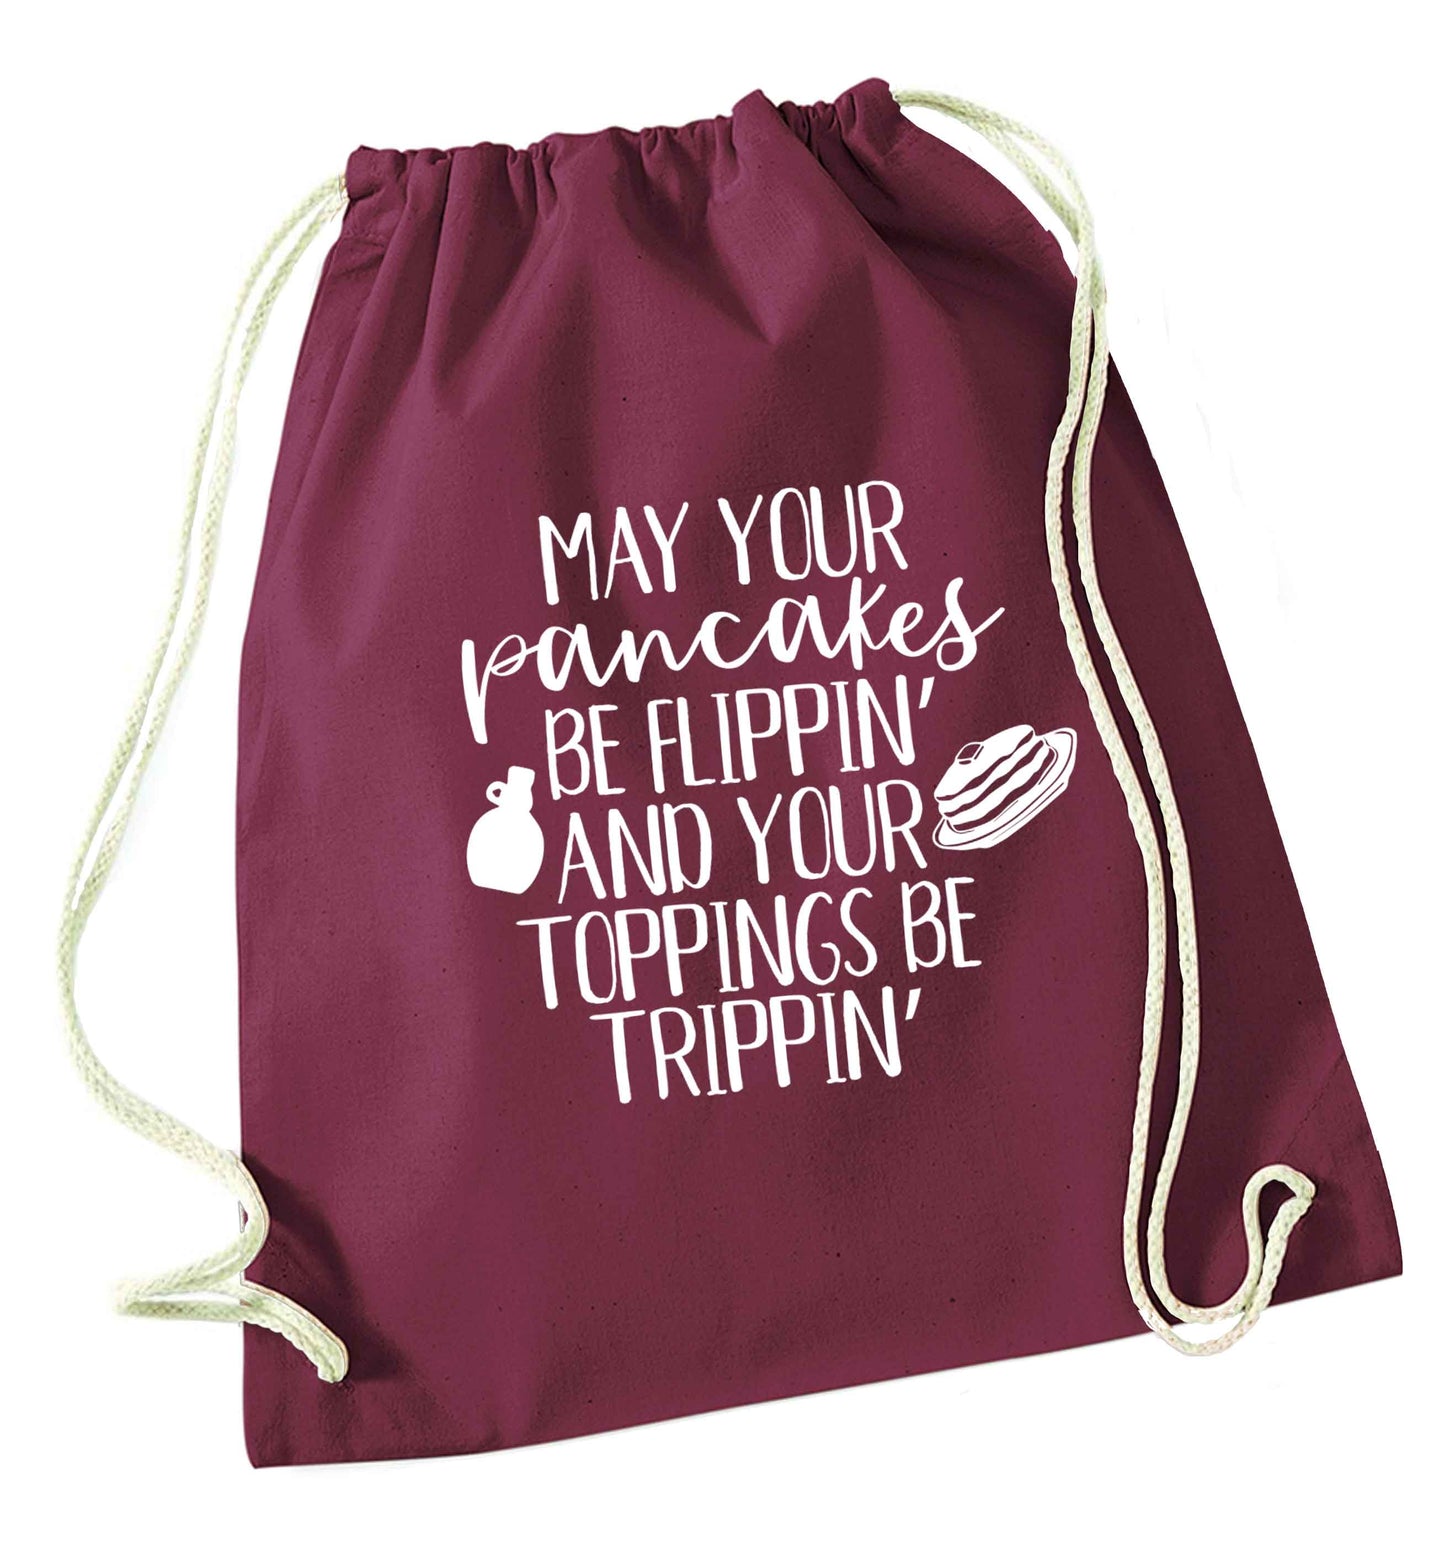 May your pancakes be flippin' and your toppings be trippin' maroon drawstring bag